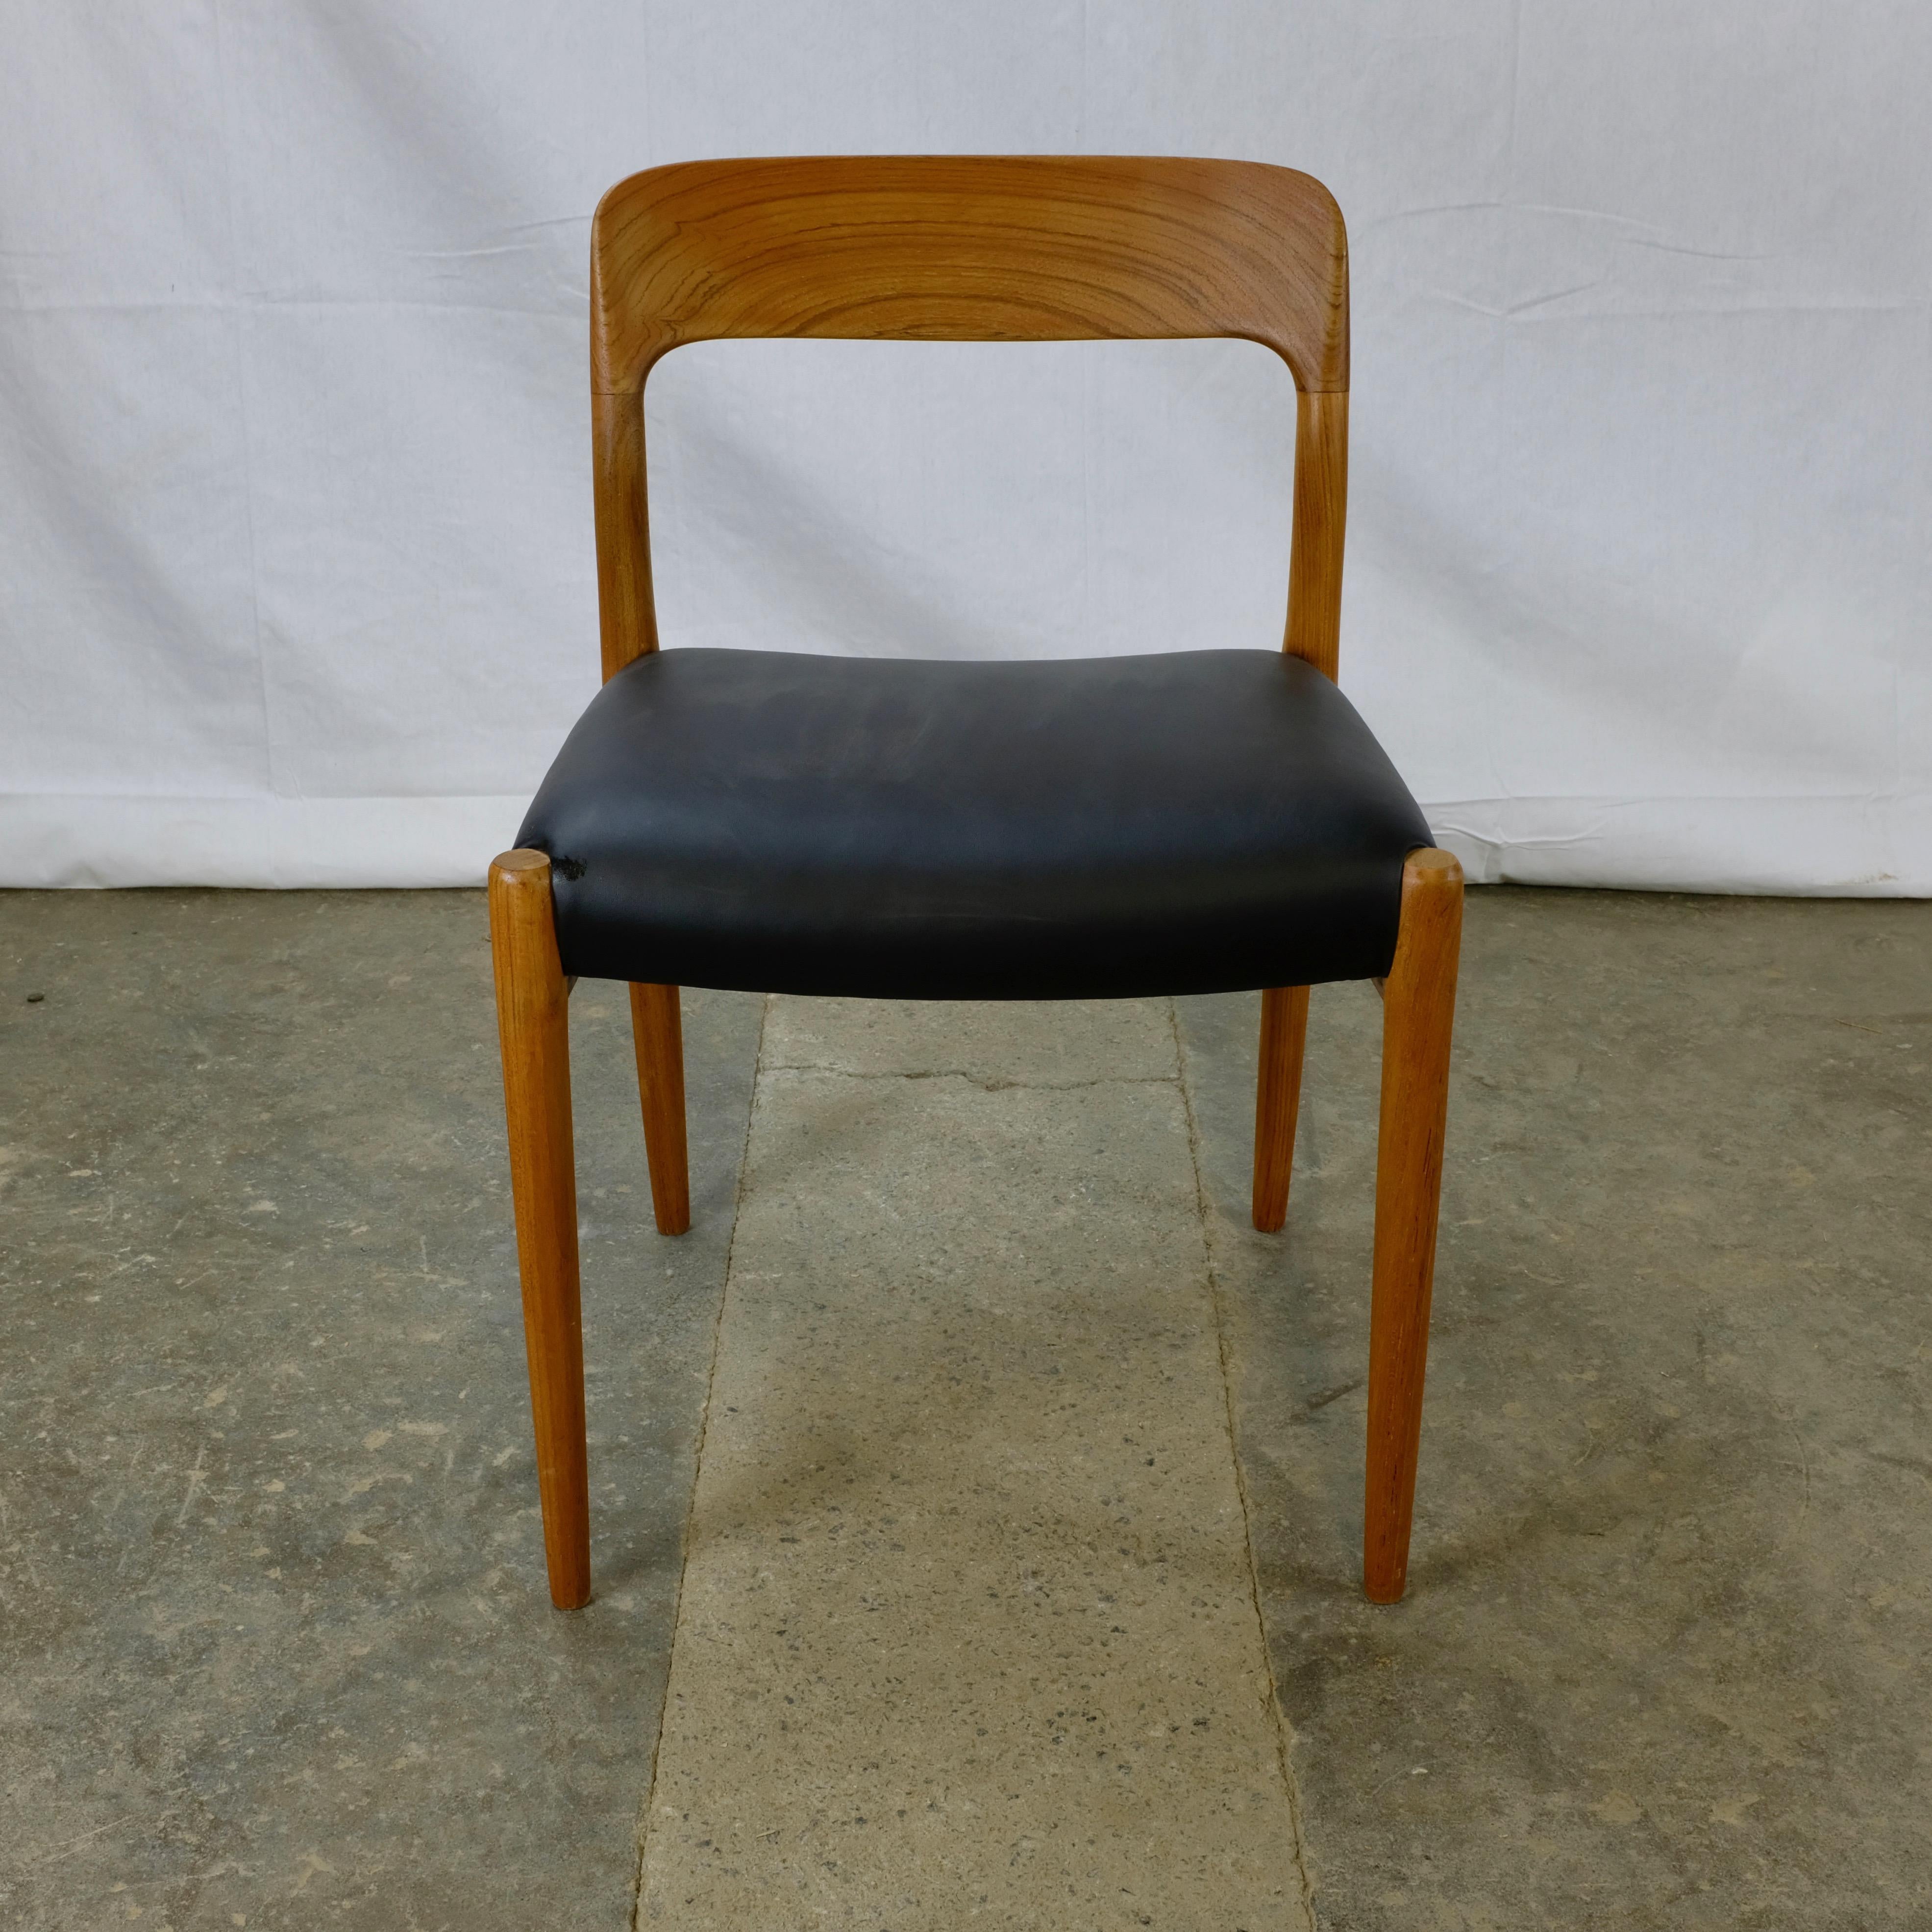 Set of five model 75 dining chairs designed by Niels Otto Møller and made in Denmark by J. L. Møllers Møbelfabrik. 

The frames are made of solid teak with broad, gracefully curved backrests, each carved from a single piece of teak. Four of the